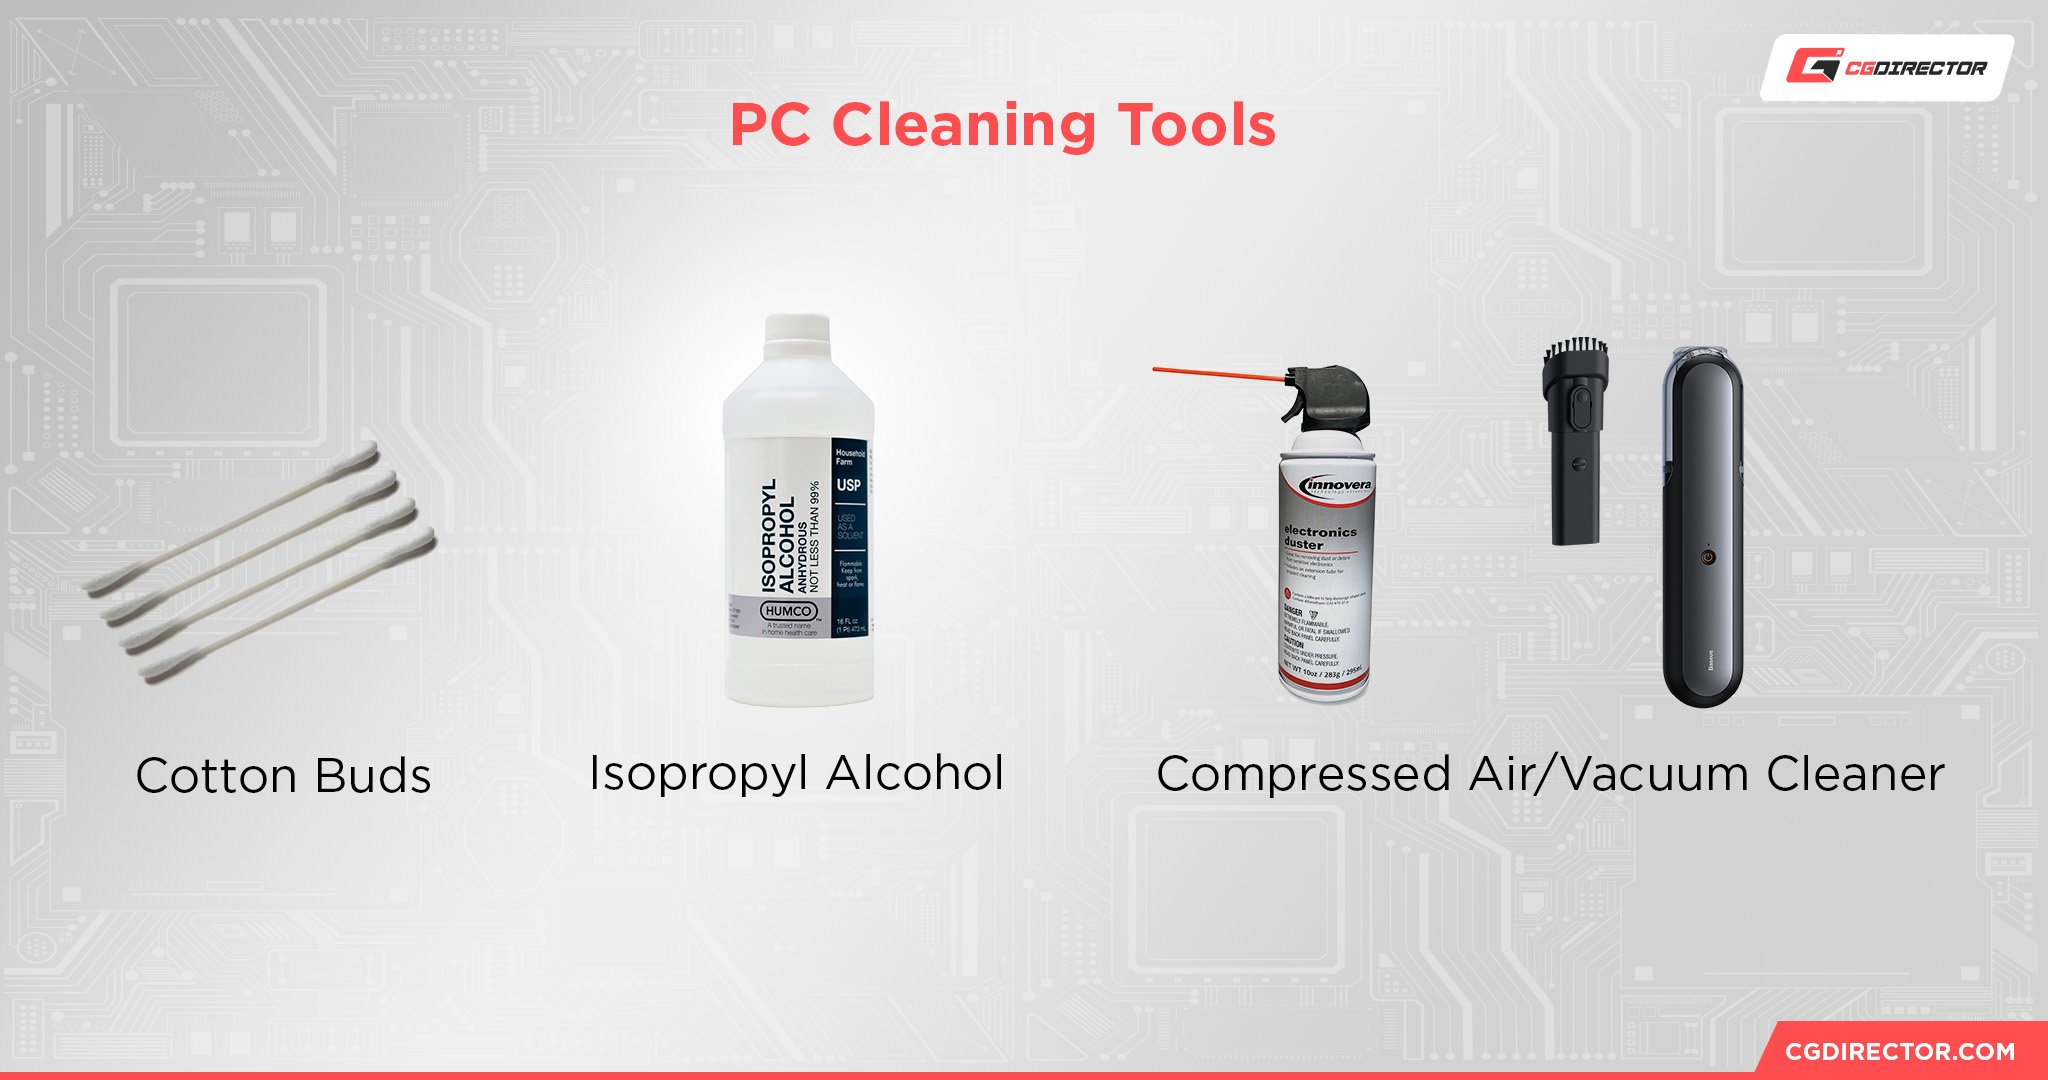 PC Cleaning Tools